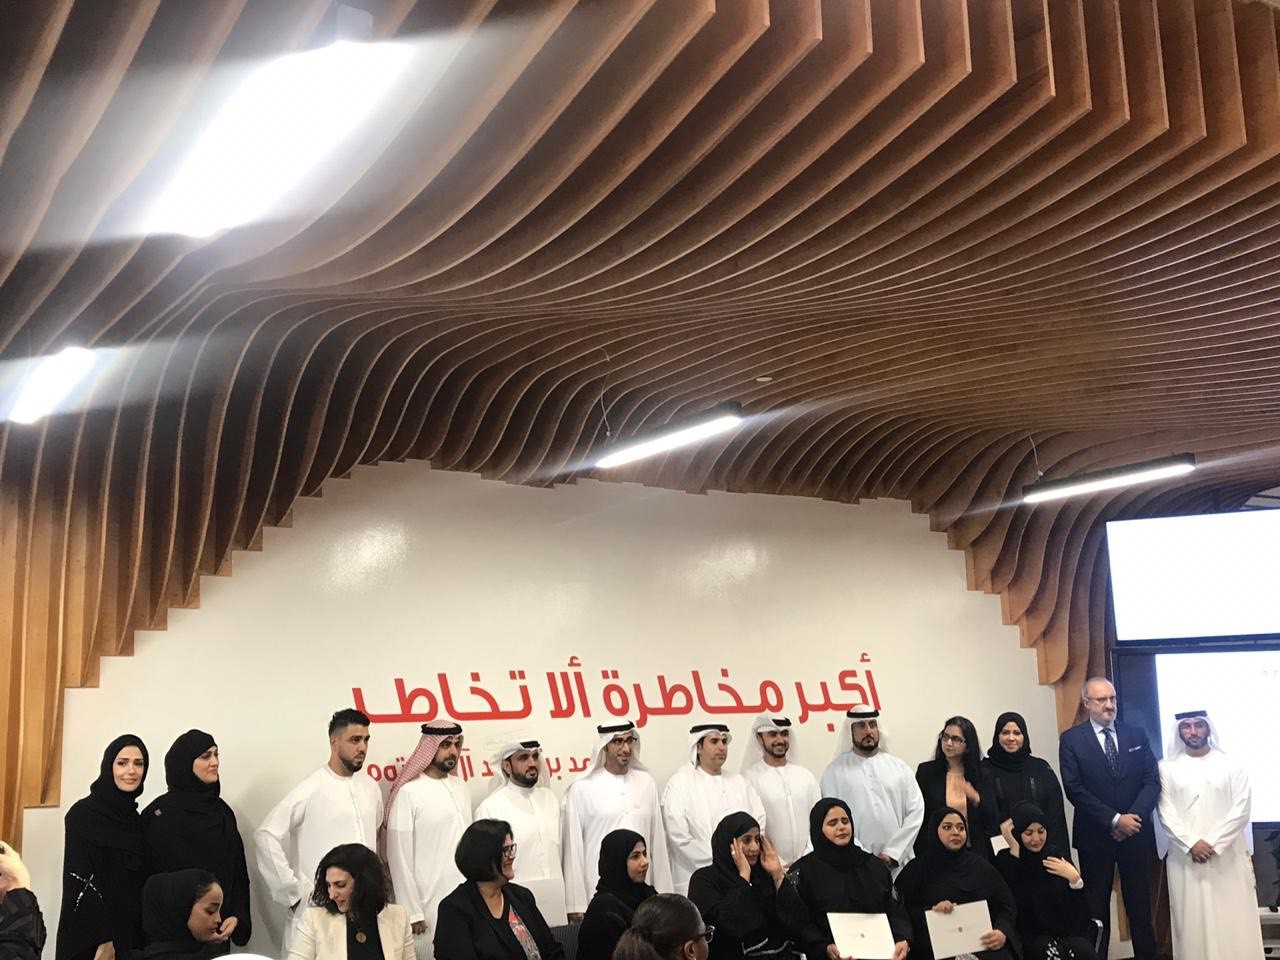 Al Masaood named one of the ‘Best Emirati Employers in the Private Sector’ by the Ministry of Human Resources and Emiratisation